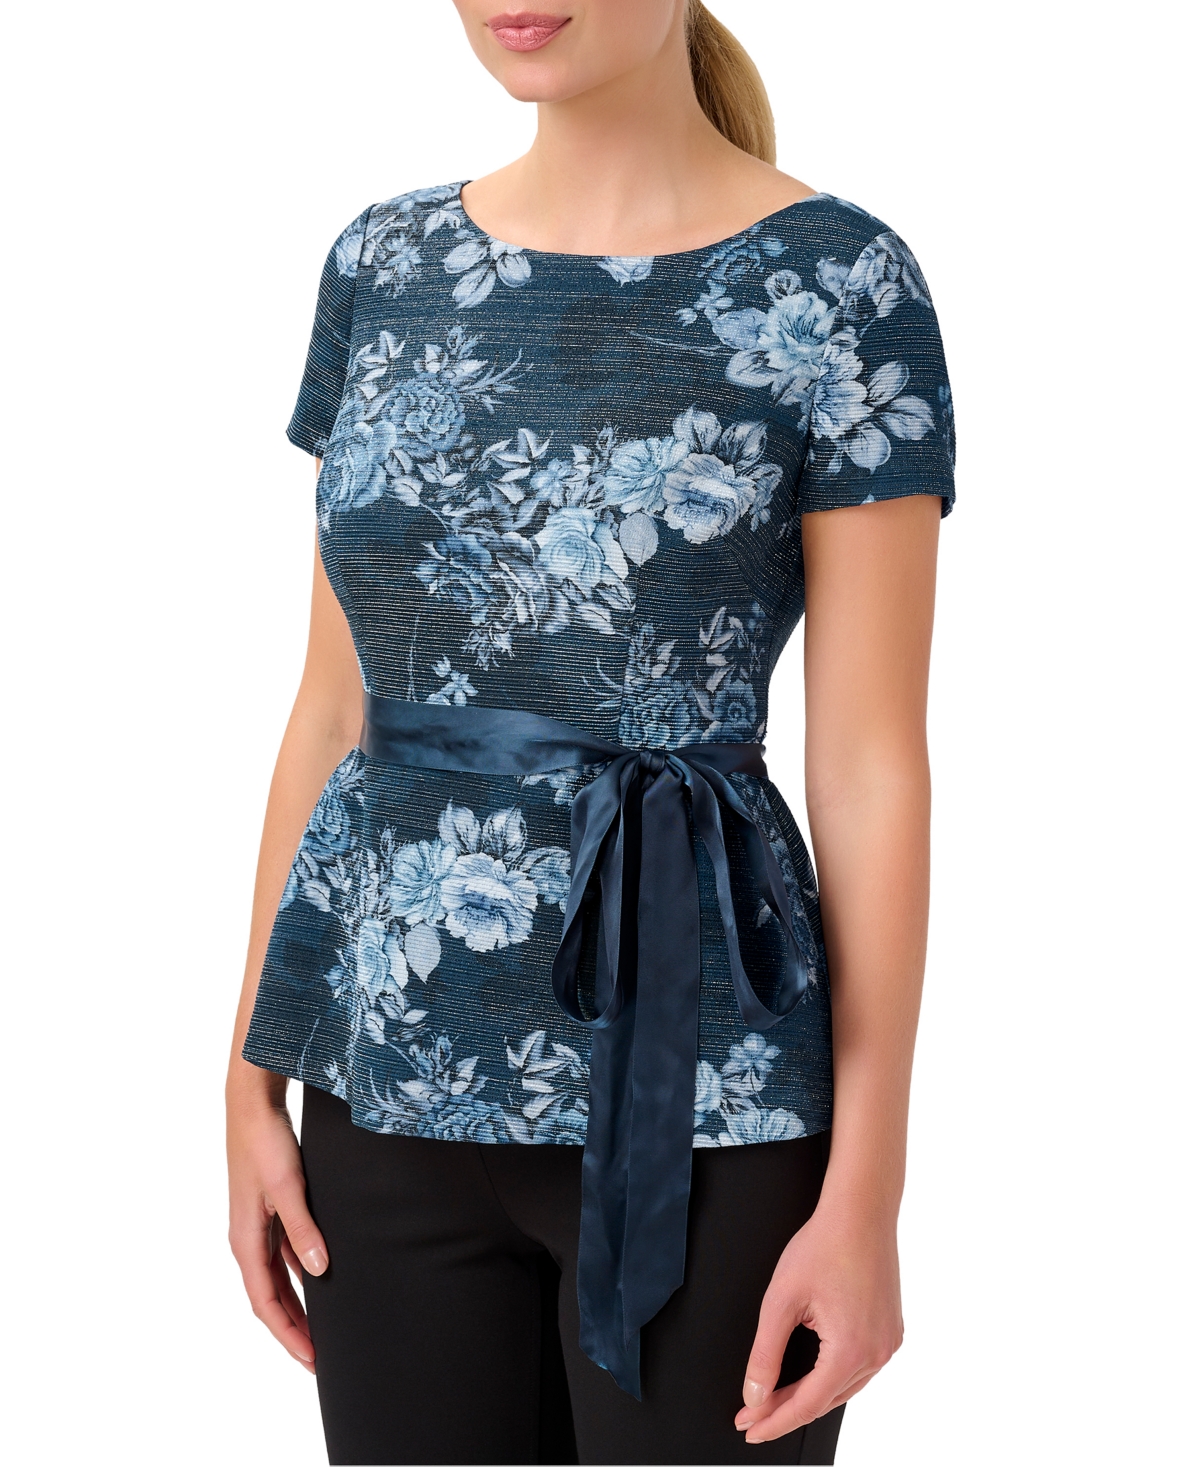  Adrianna Papell Women's Metallic Floral-Print Belted Top